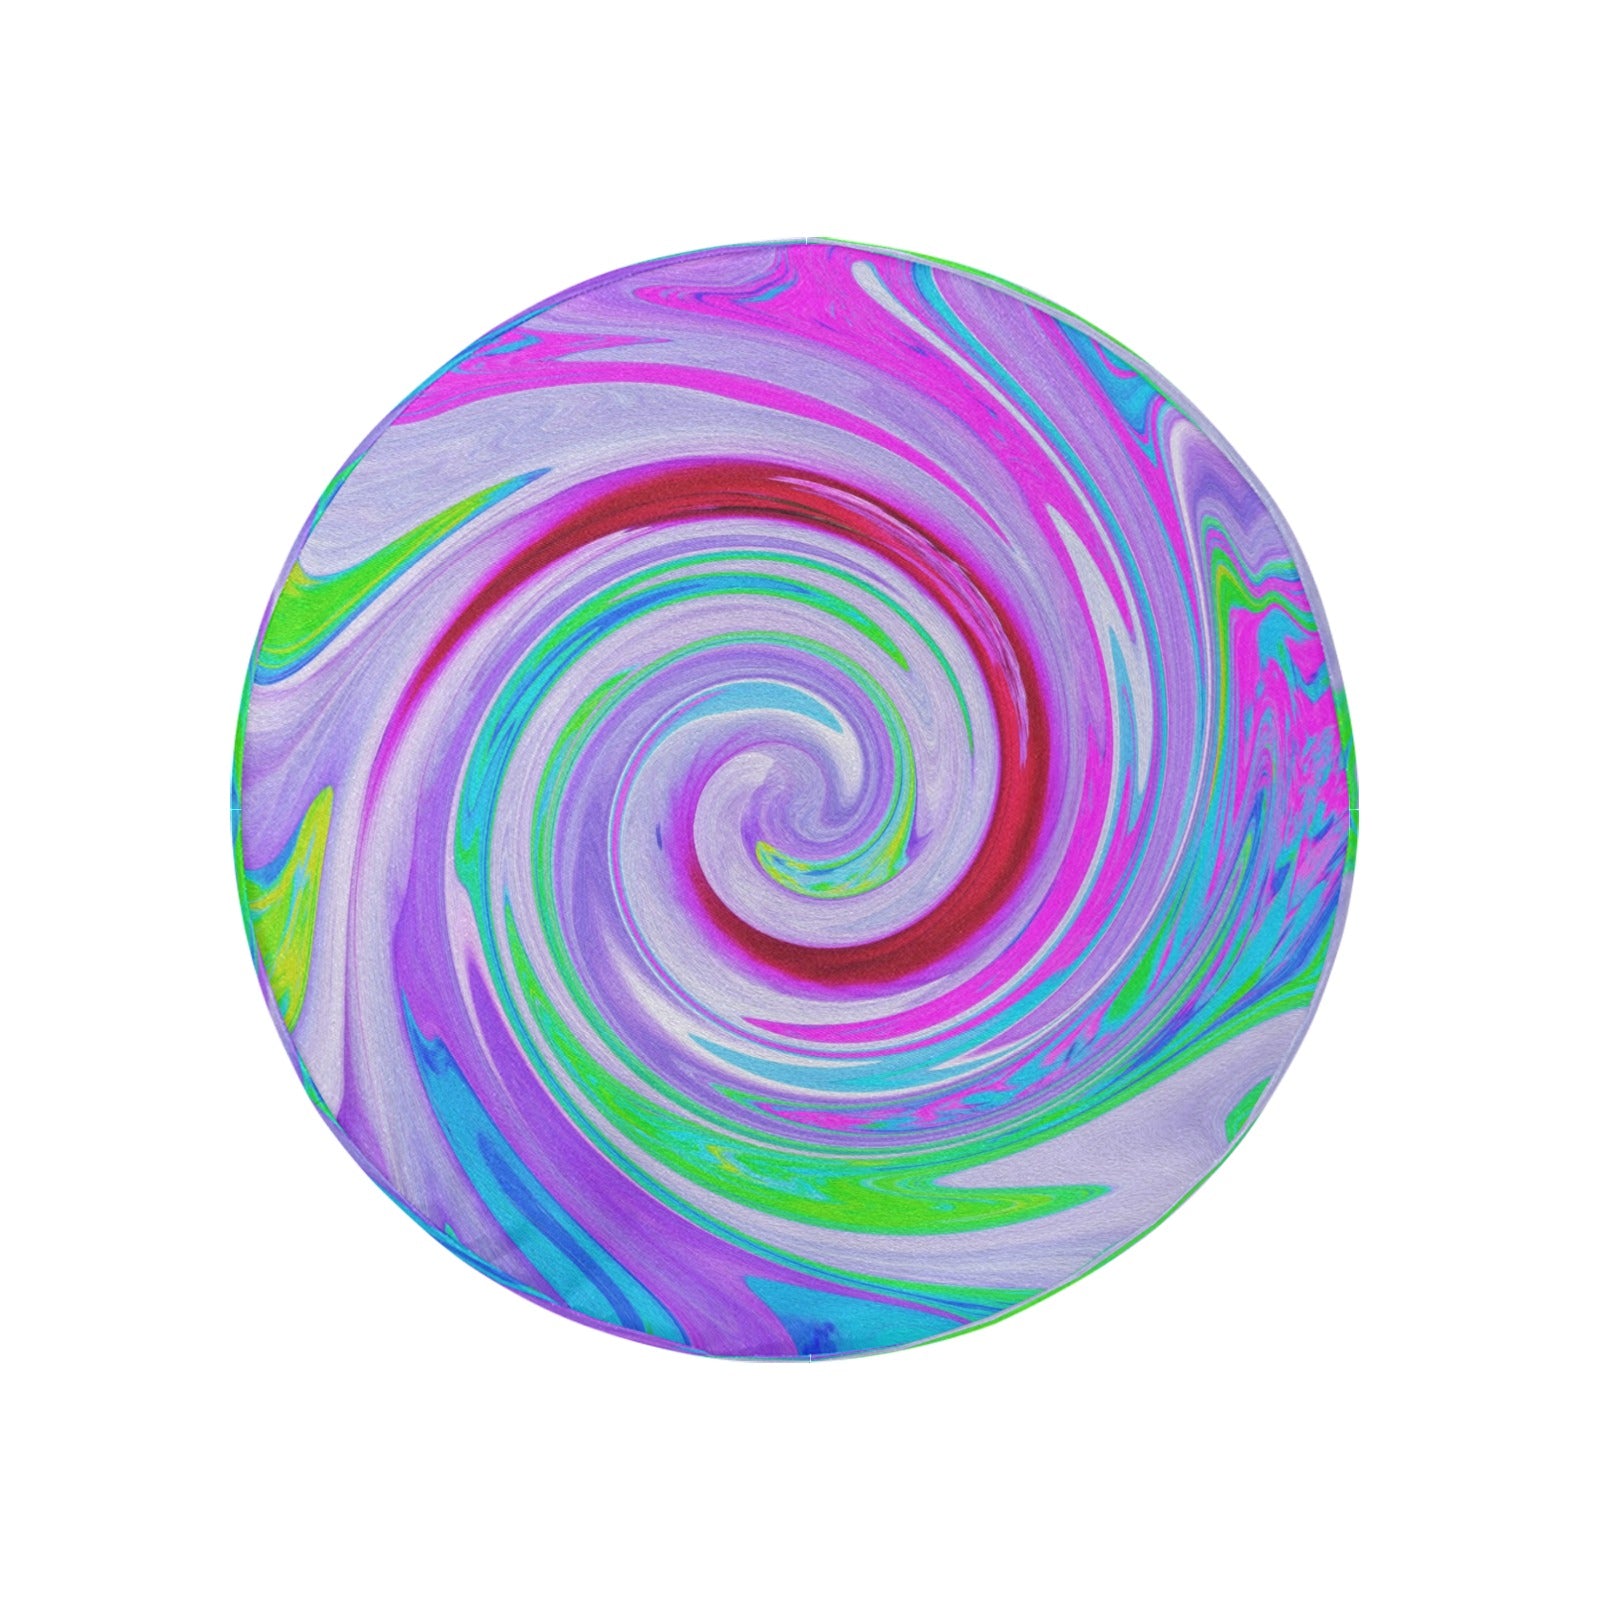 Spare Tire Covers - Groovy Abstract Red Swirl on Purple and Pink - Medium